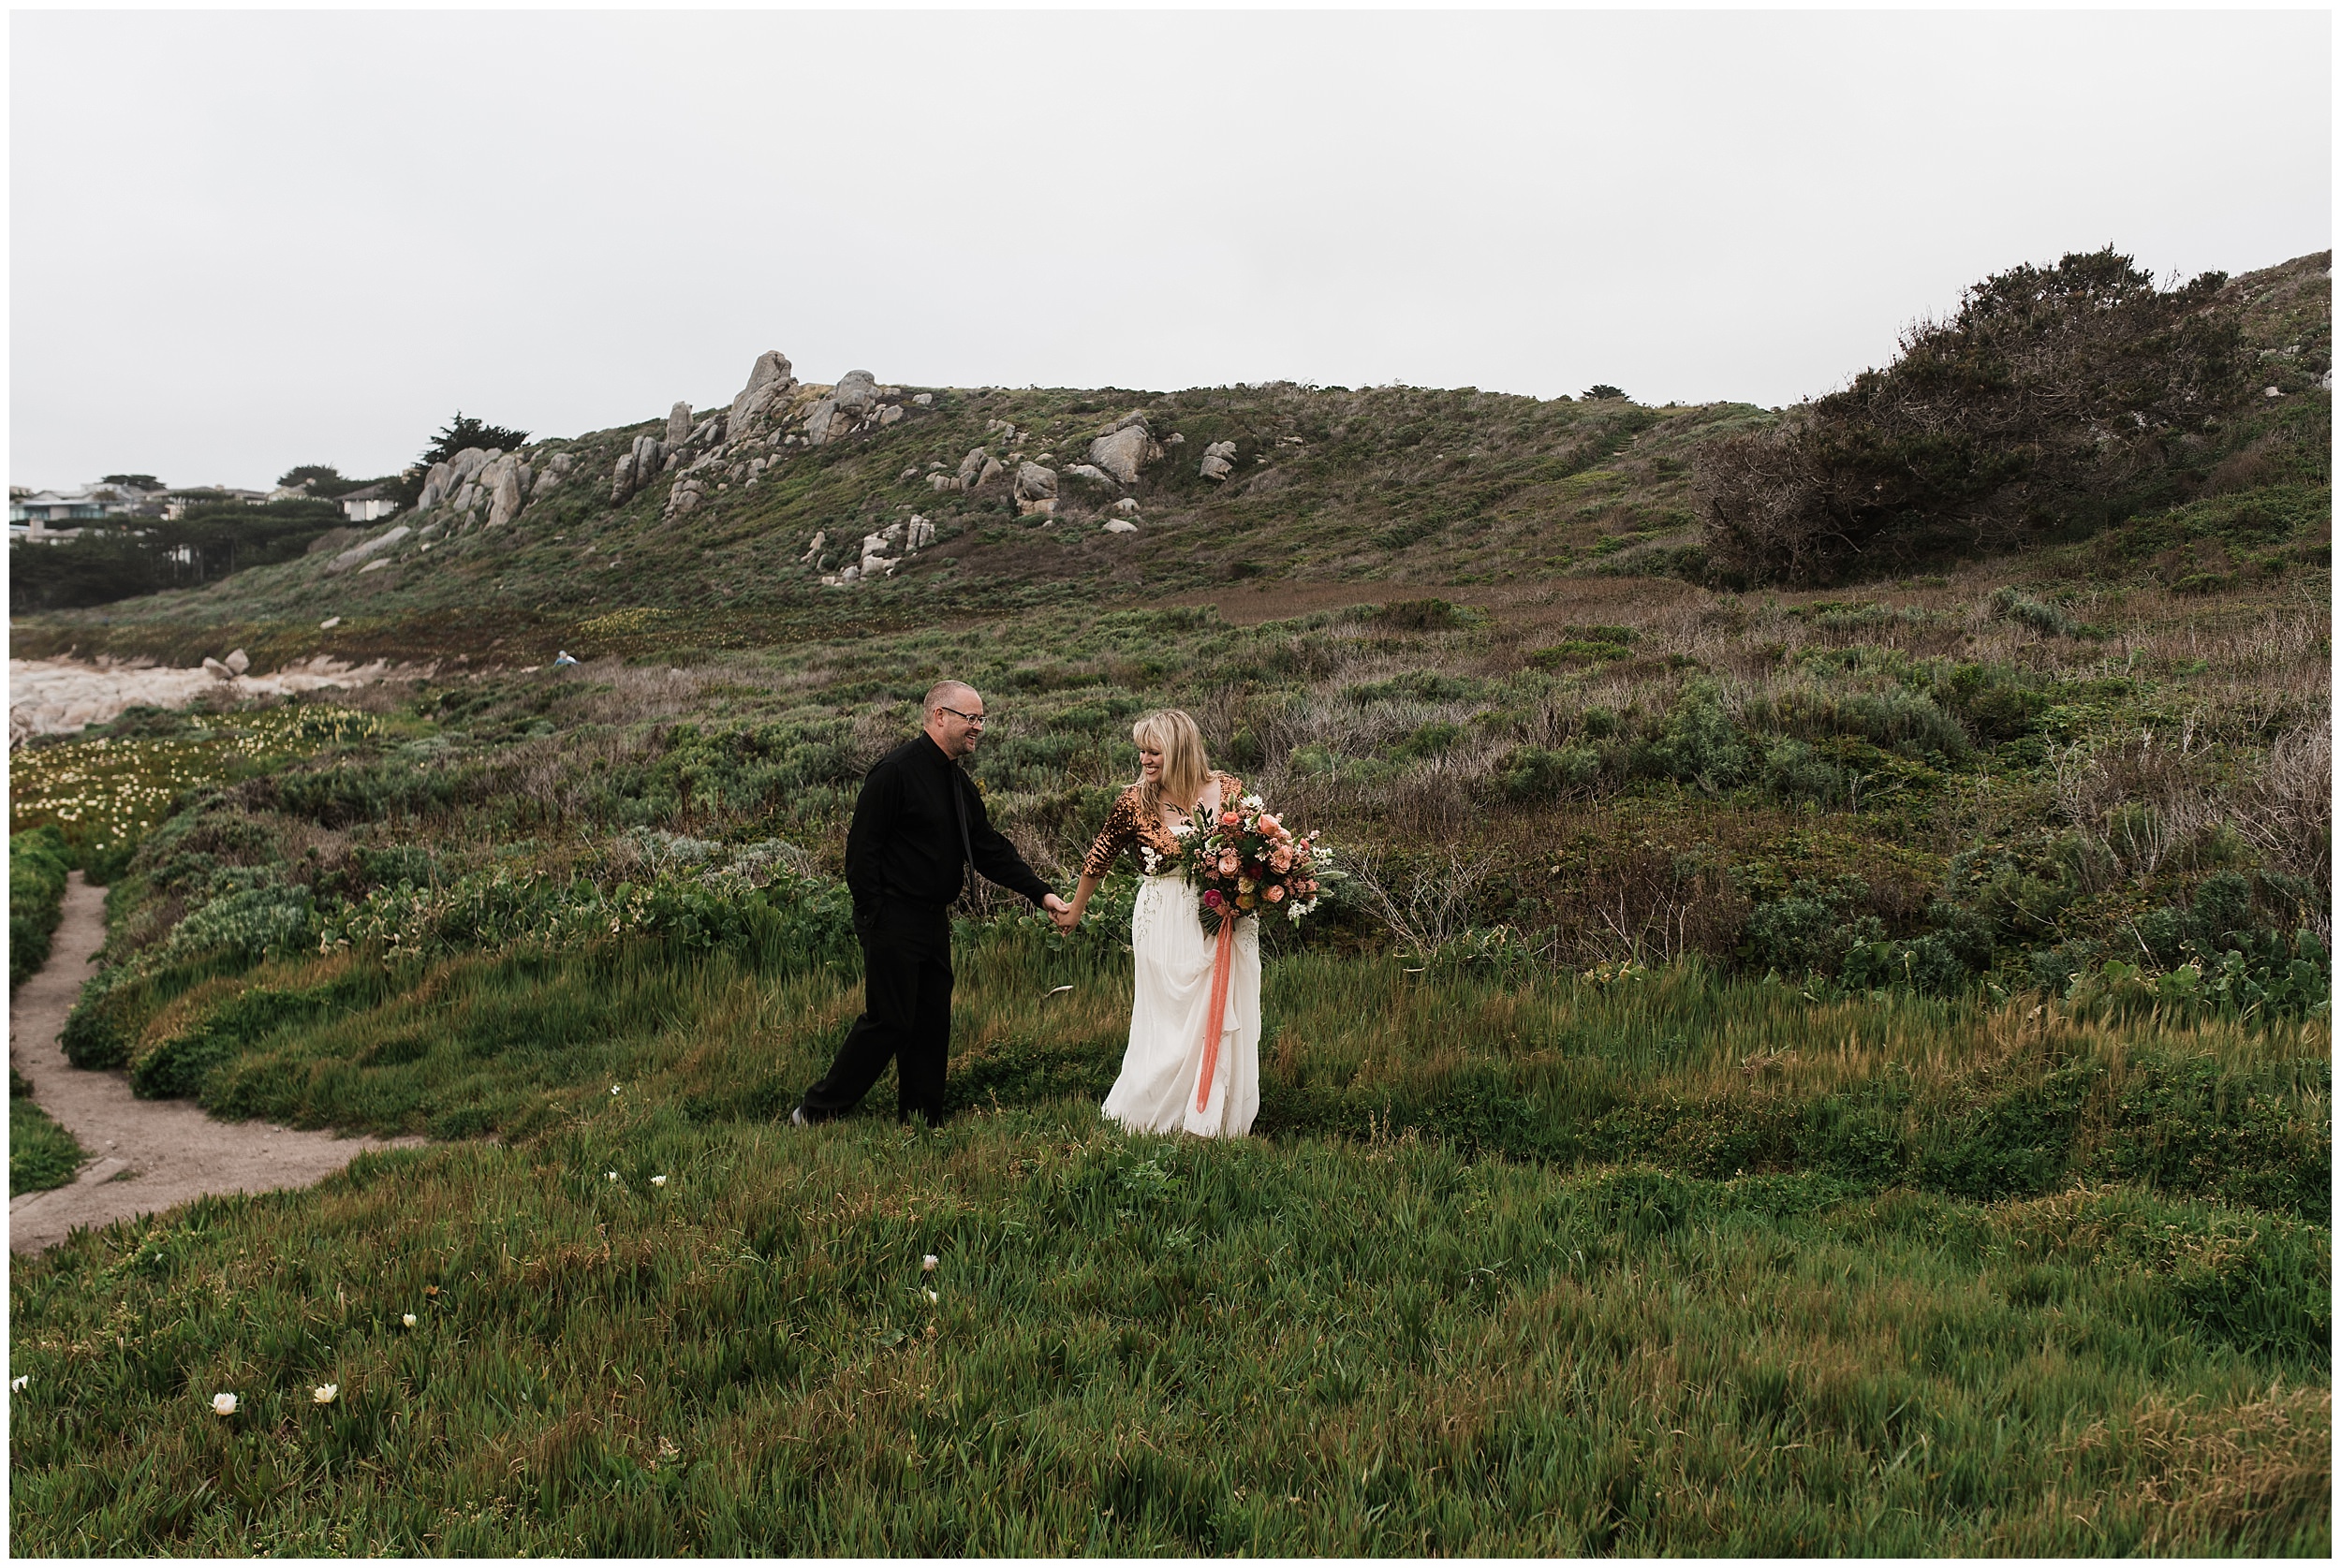 What is an elopement?